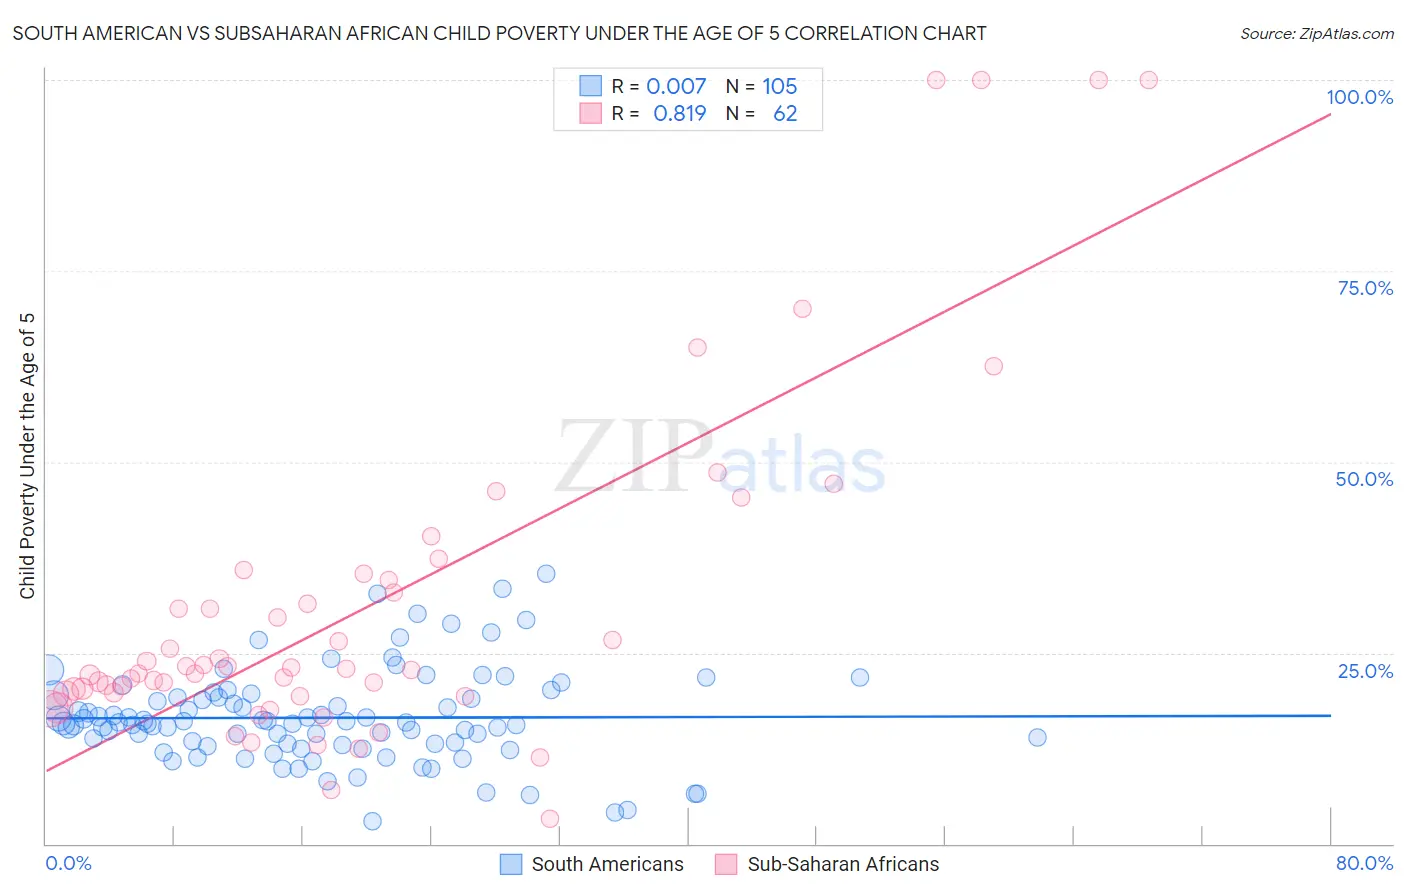 South American vs Subsaharan African Child Poverty Under the Age of 5